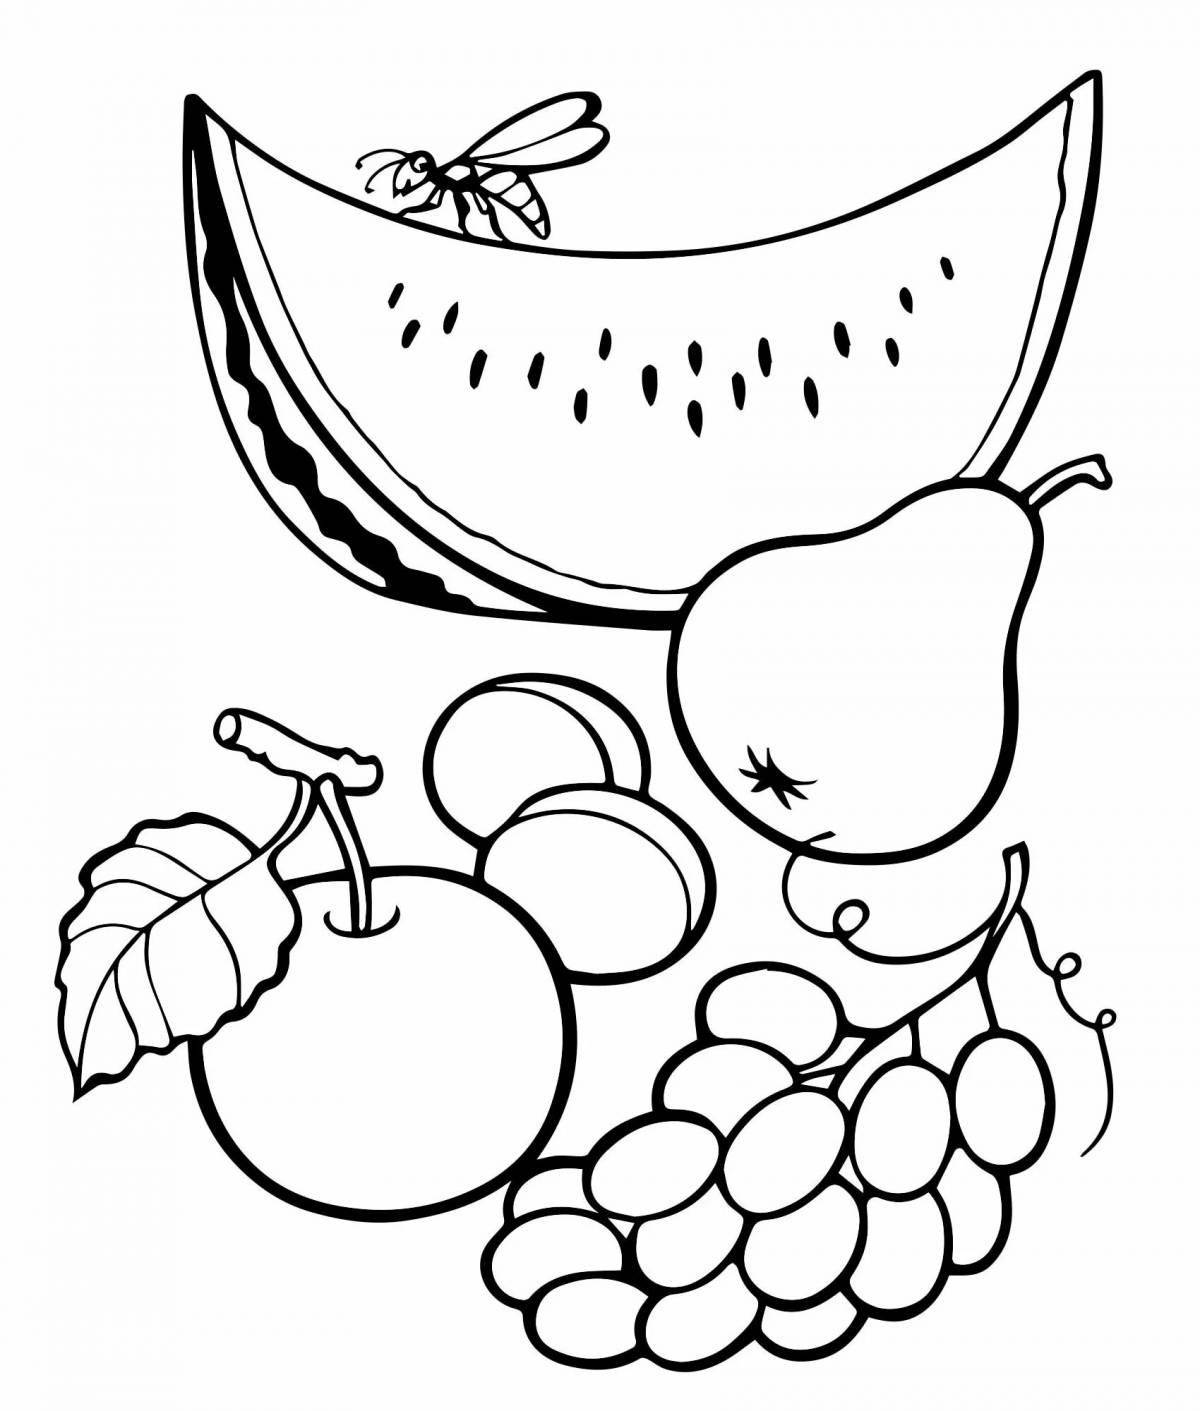 Colorful and charming coloring book fruits and berries for girls